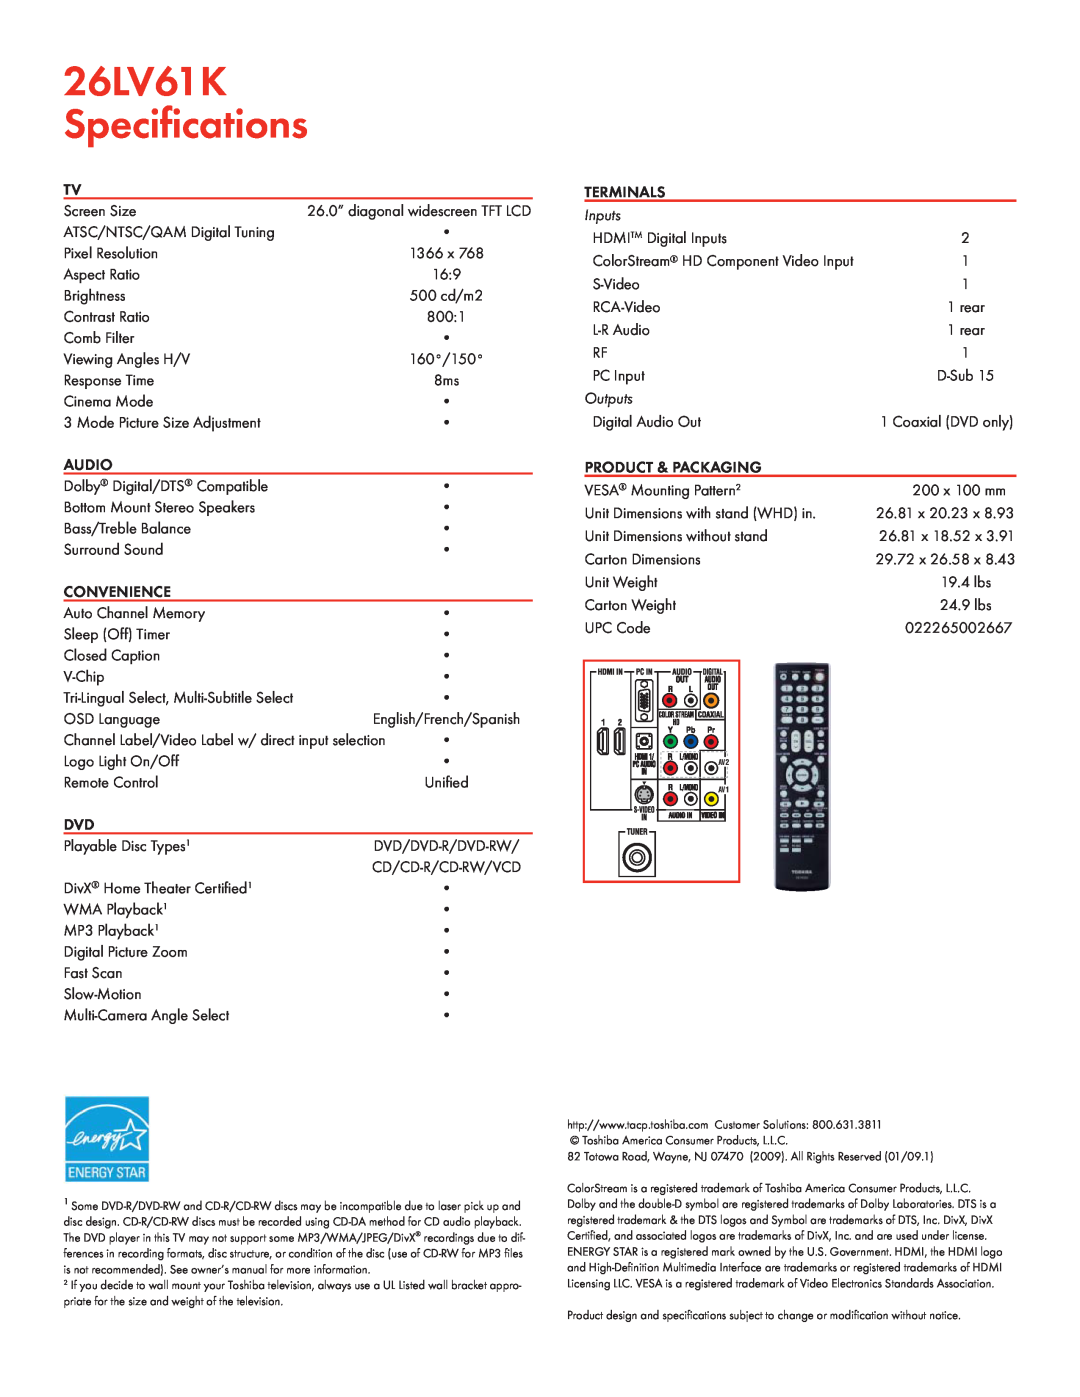 Toshiba manual 26LV61K Speciﬁcations, Audio, Convenience, Terminals, Inputs, Outputs, Product & Packaging 